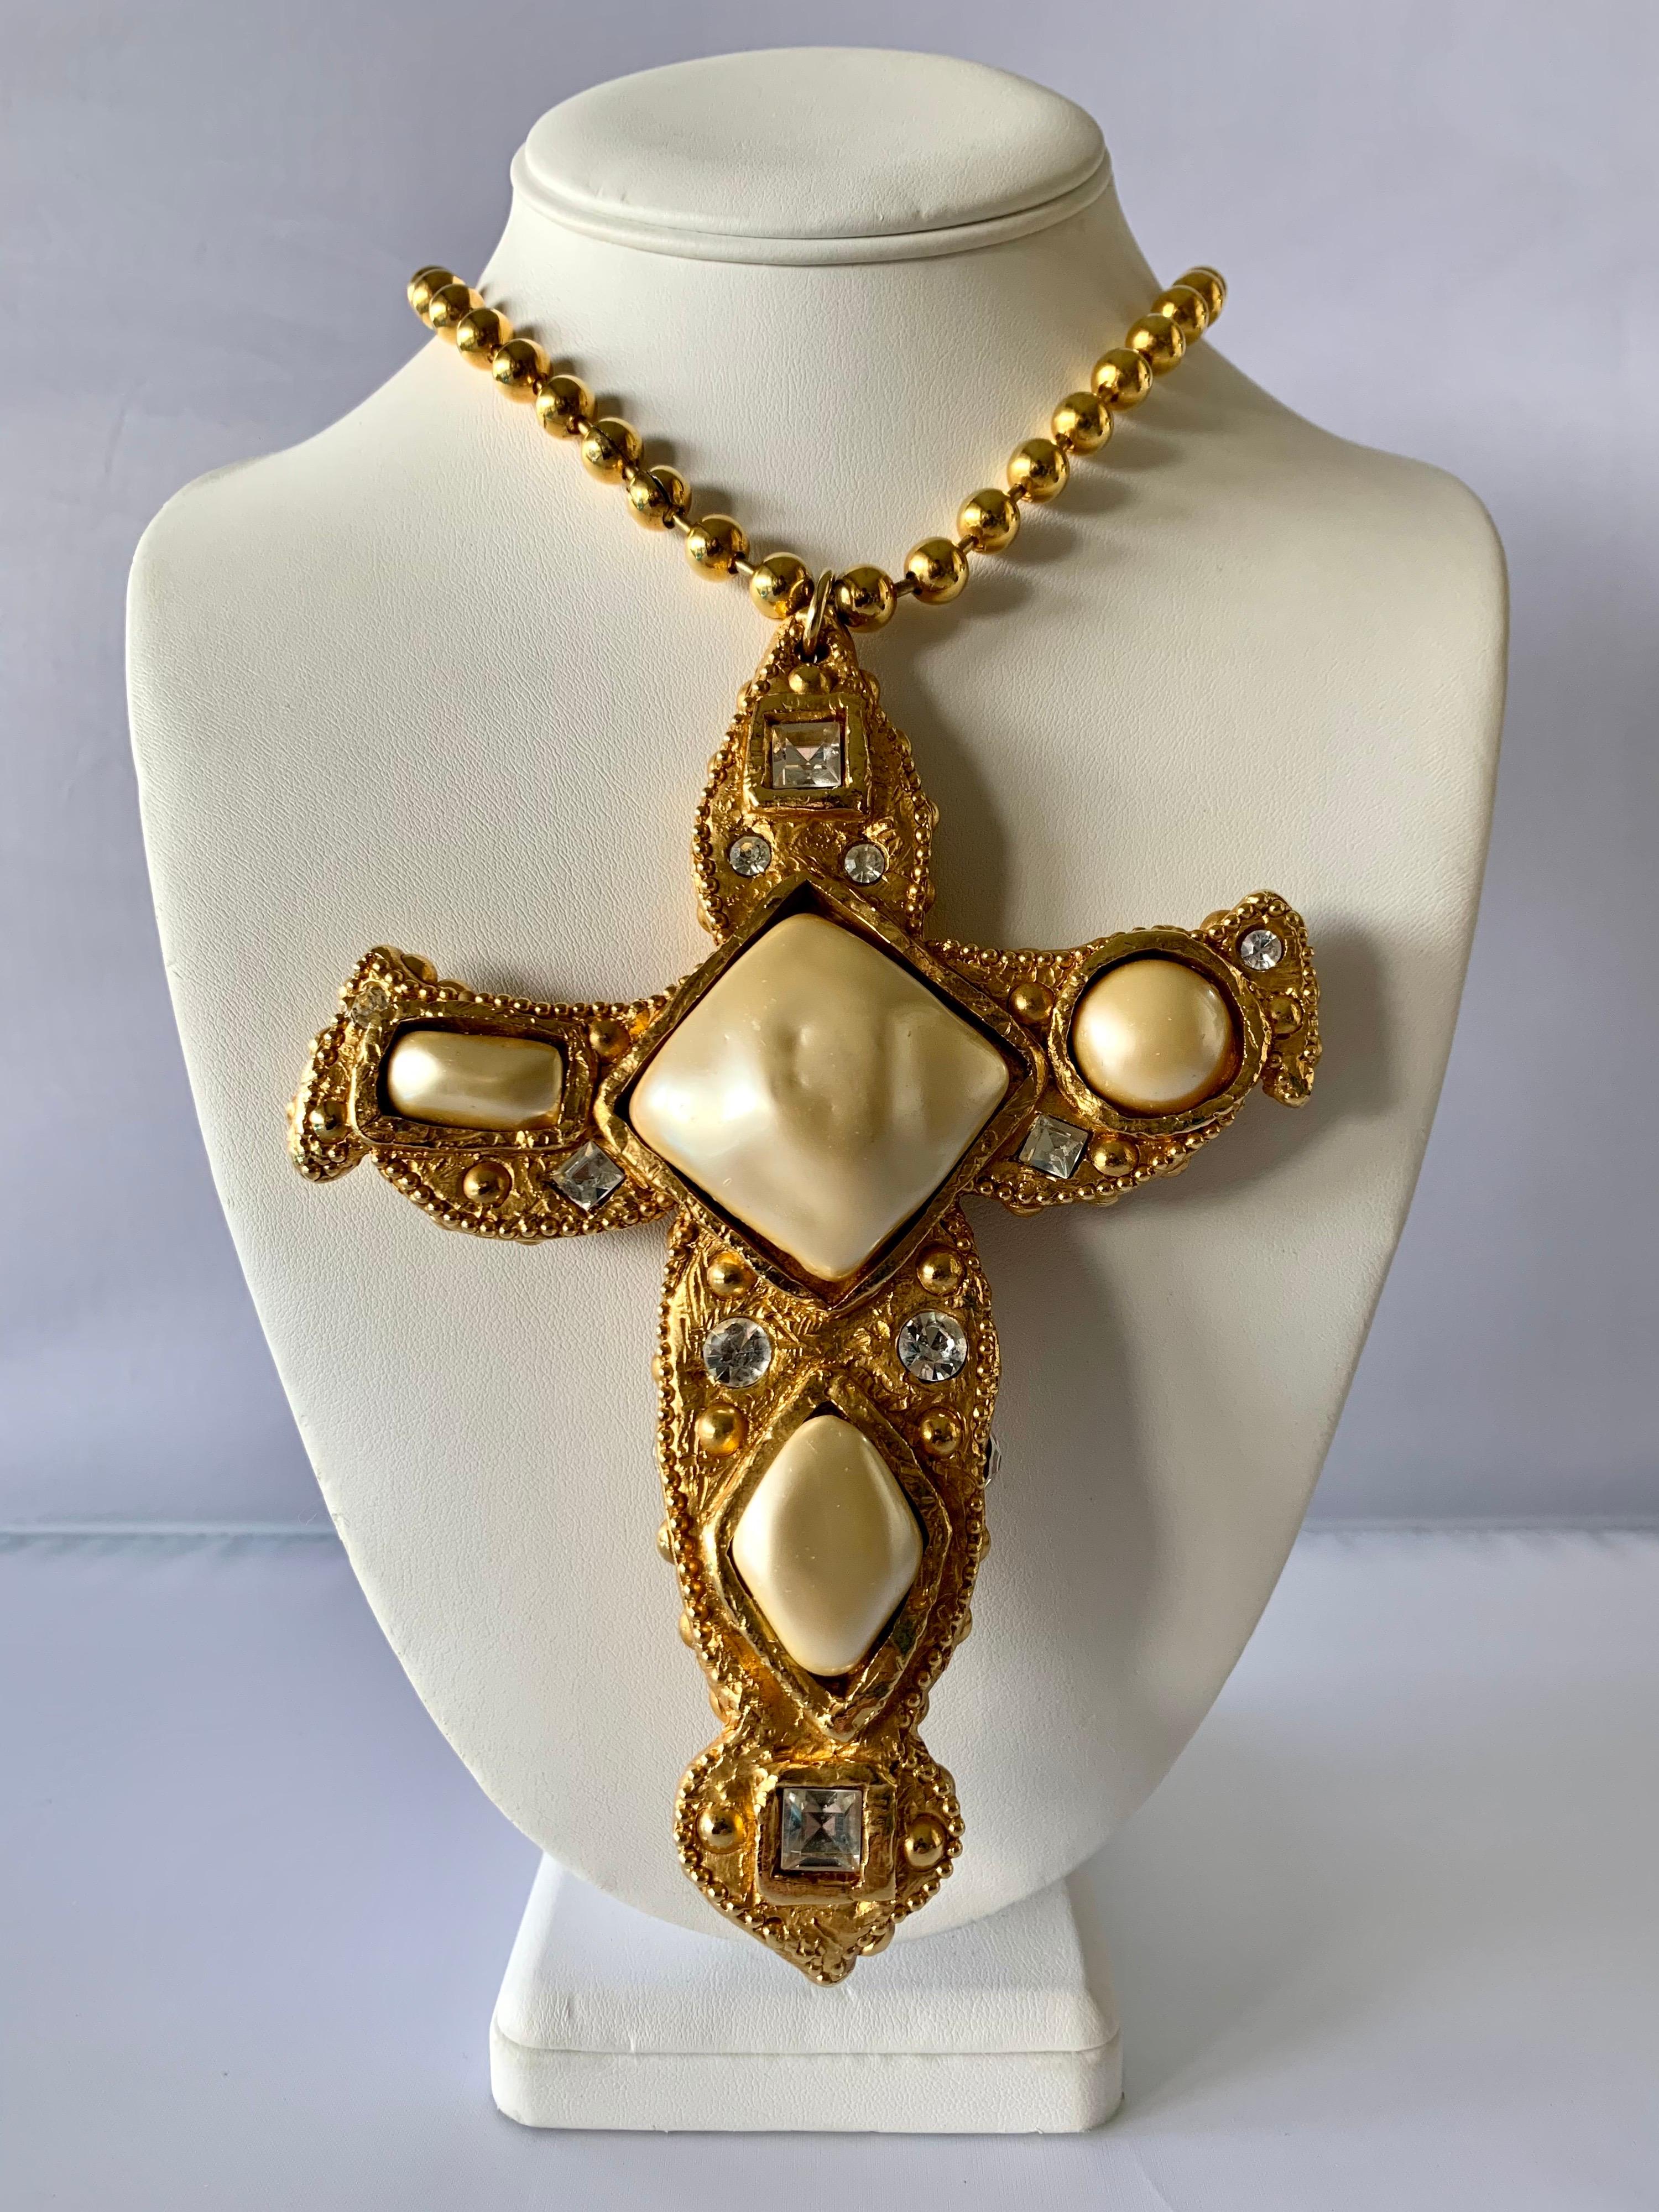 Vintage French oversized pendant necklace featuring an oversized gold resin cross embellished with large faux pearls and diamante rhinestones in a Byzantine manner - signed Alexis Lahellec on the back made in Paris.

The pendant measures 6 inches